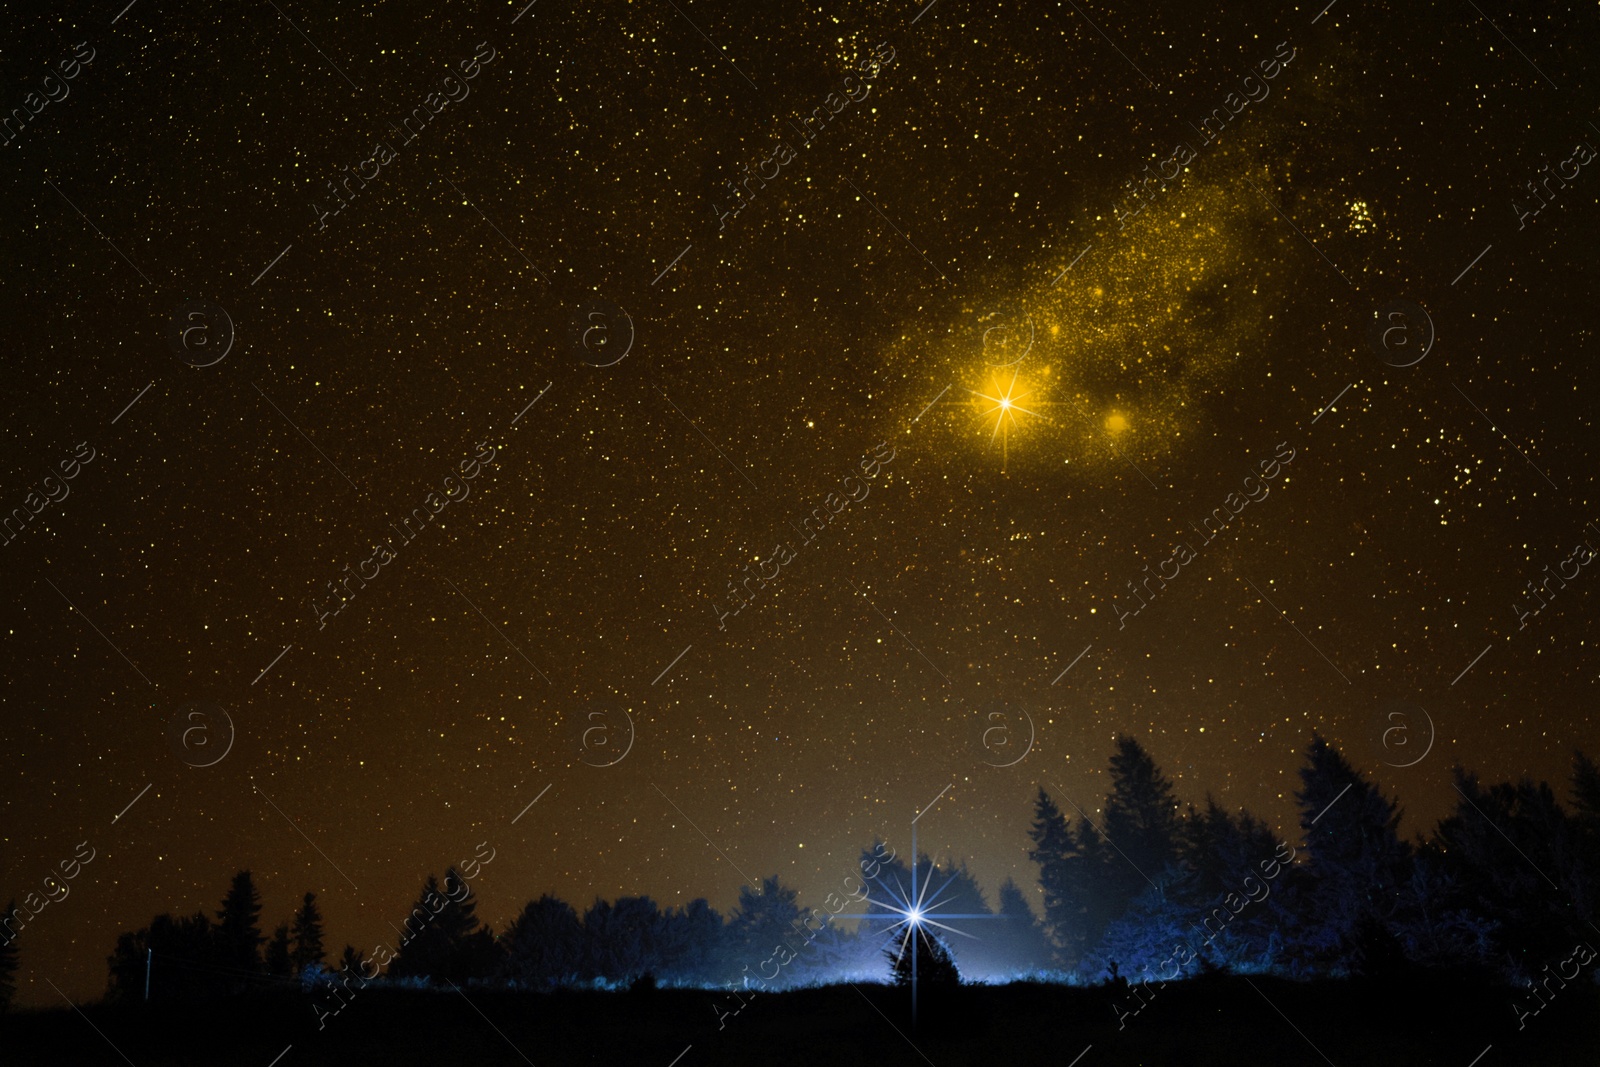 Image of Dark forest under starry sky at night